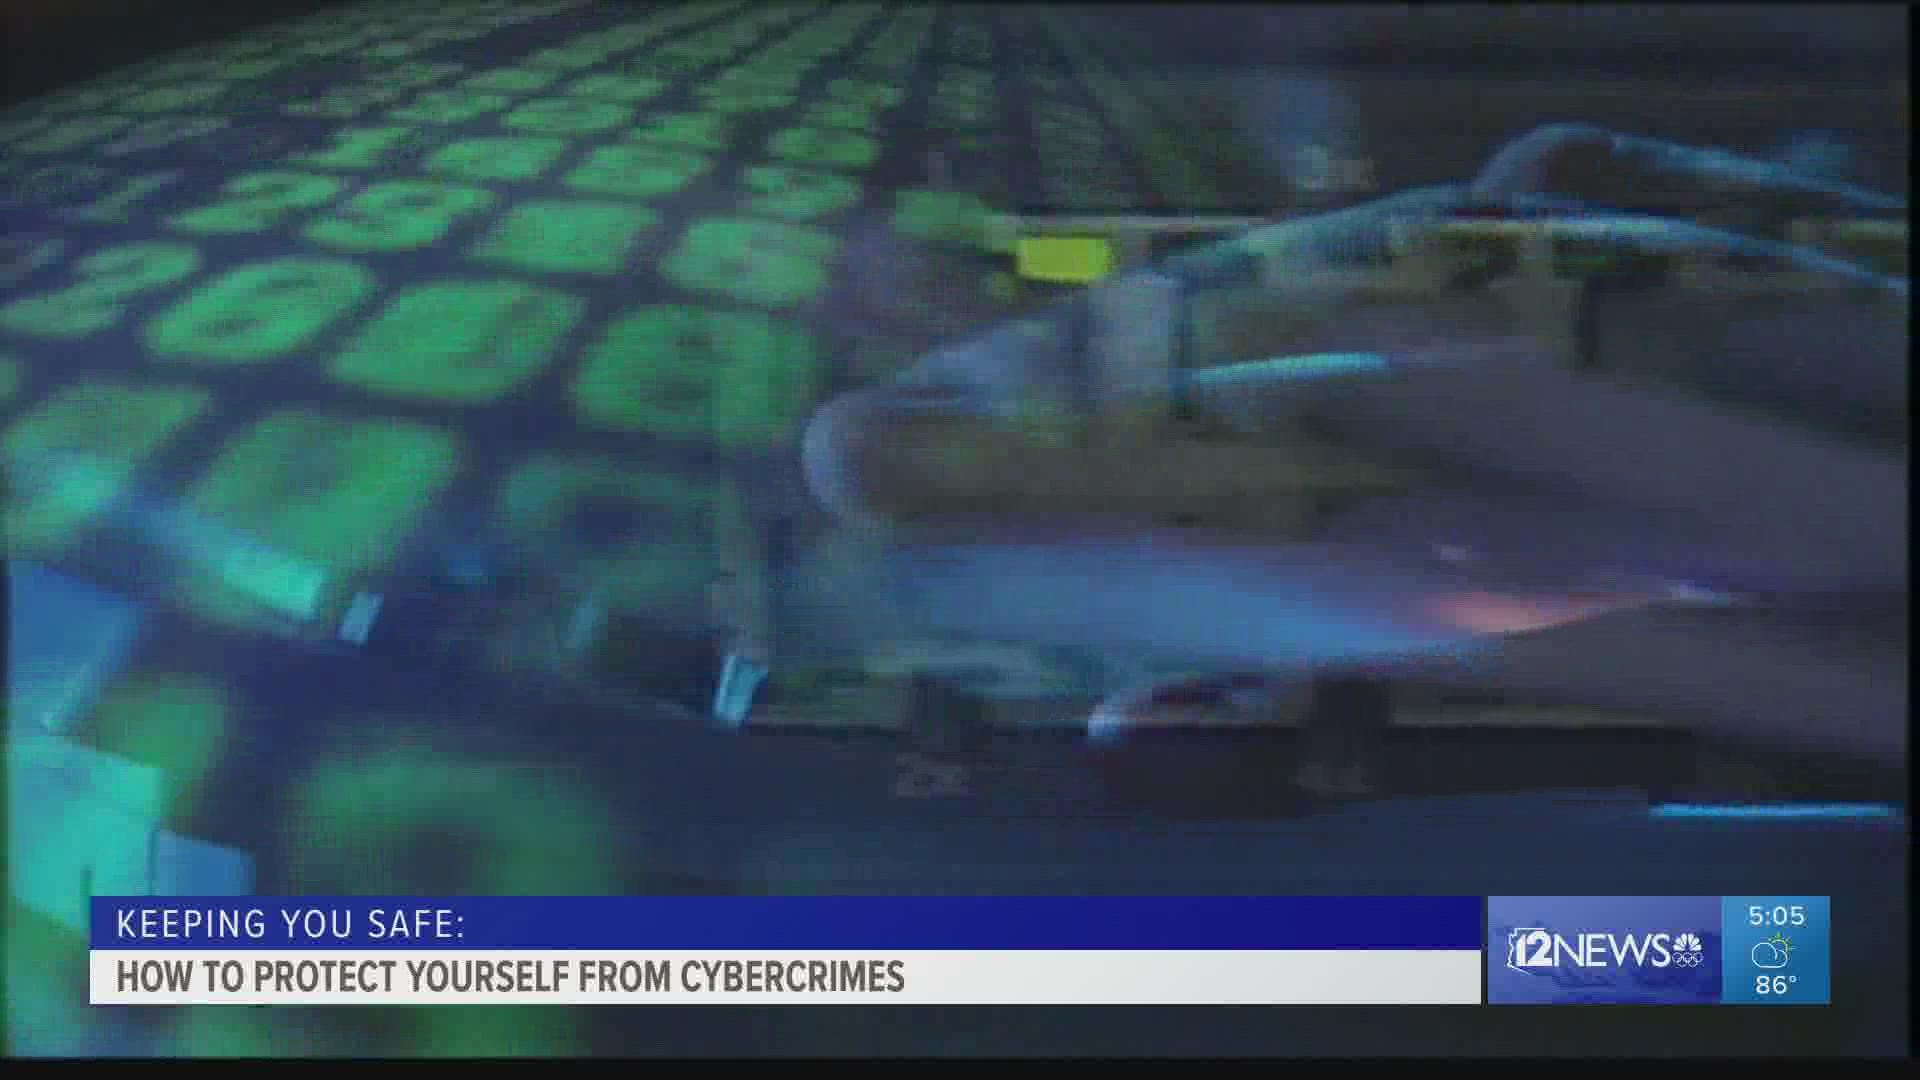 A Valley tech expert explains how cybercriminals are operating and what you can do to protect yourself.